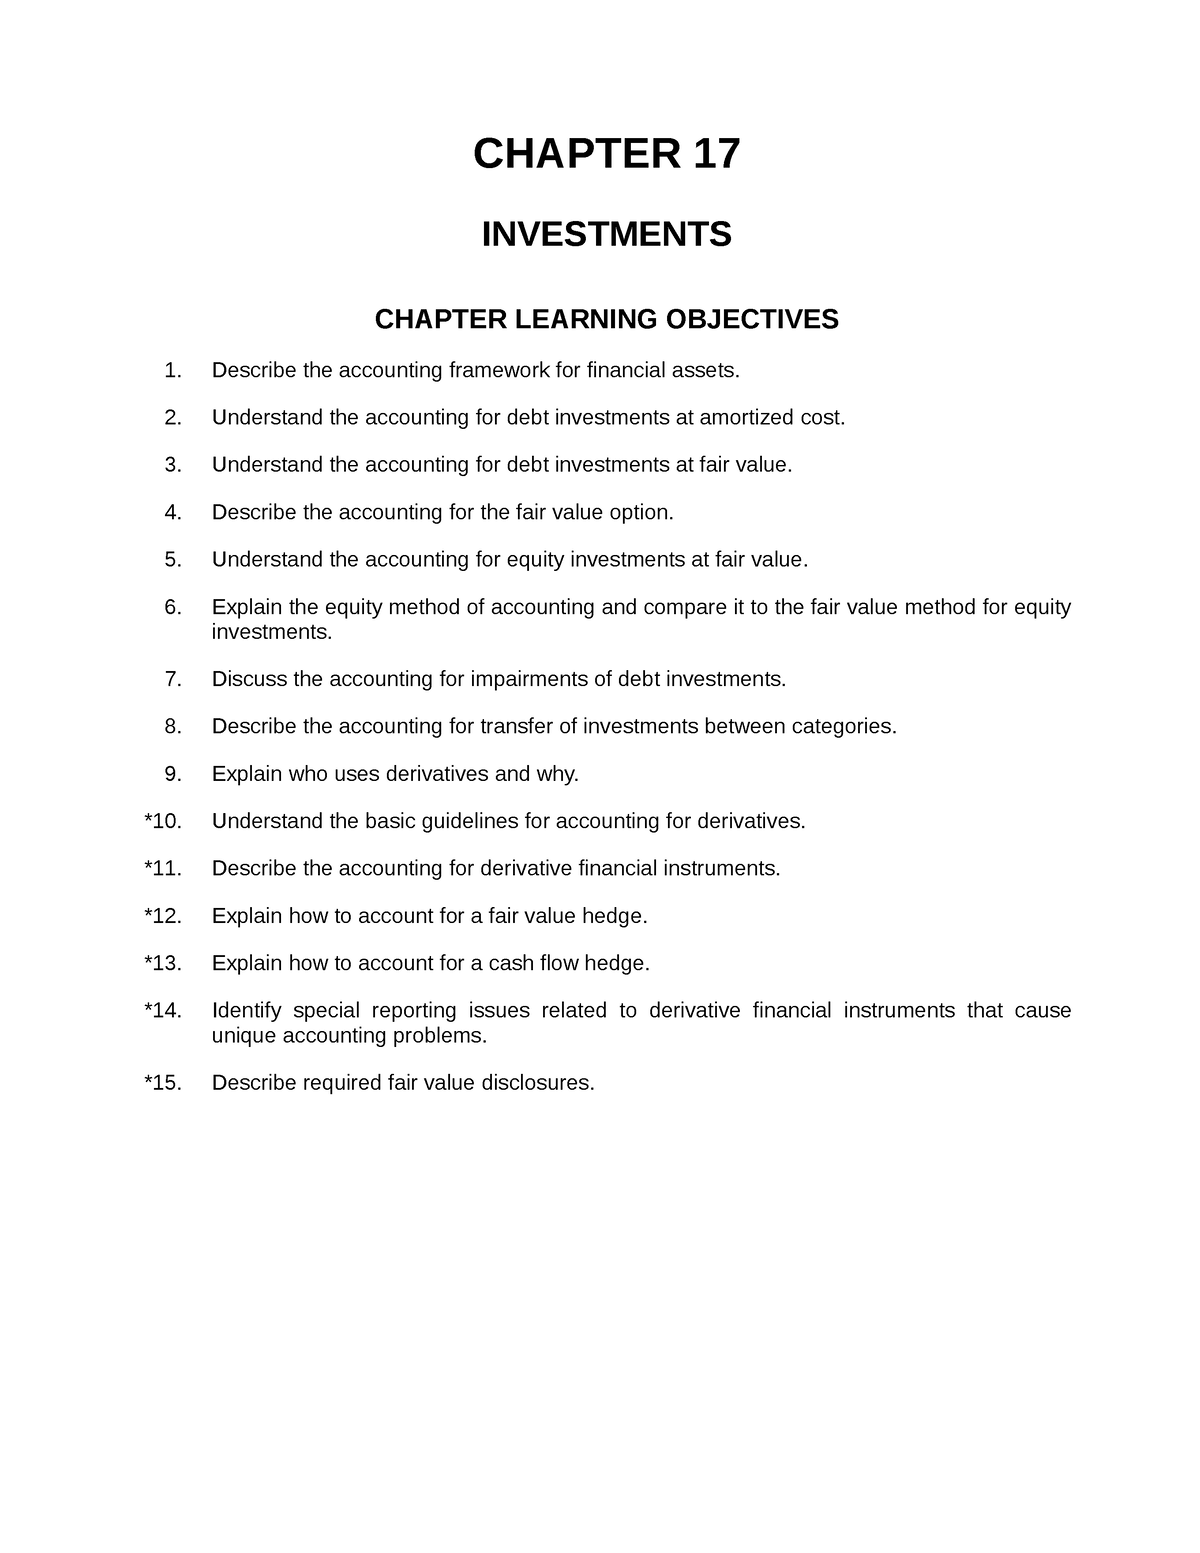 Ch17 Financial Accounting Summary Acc 101 Edit Chapter 17 Investments Chapter Learning